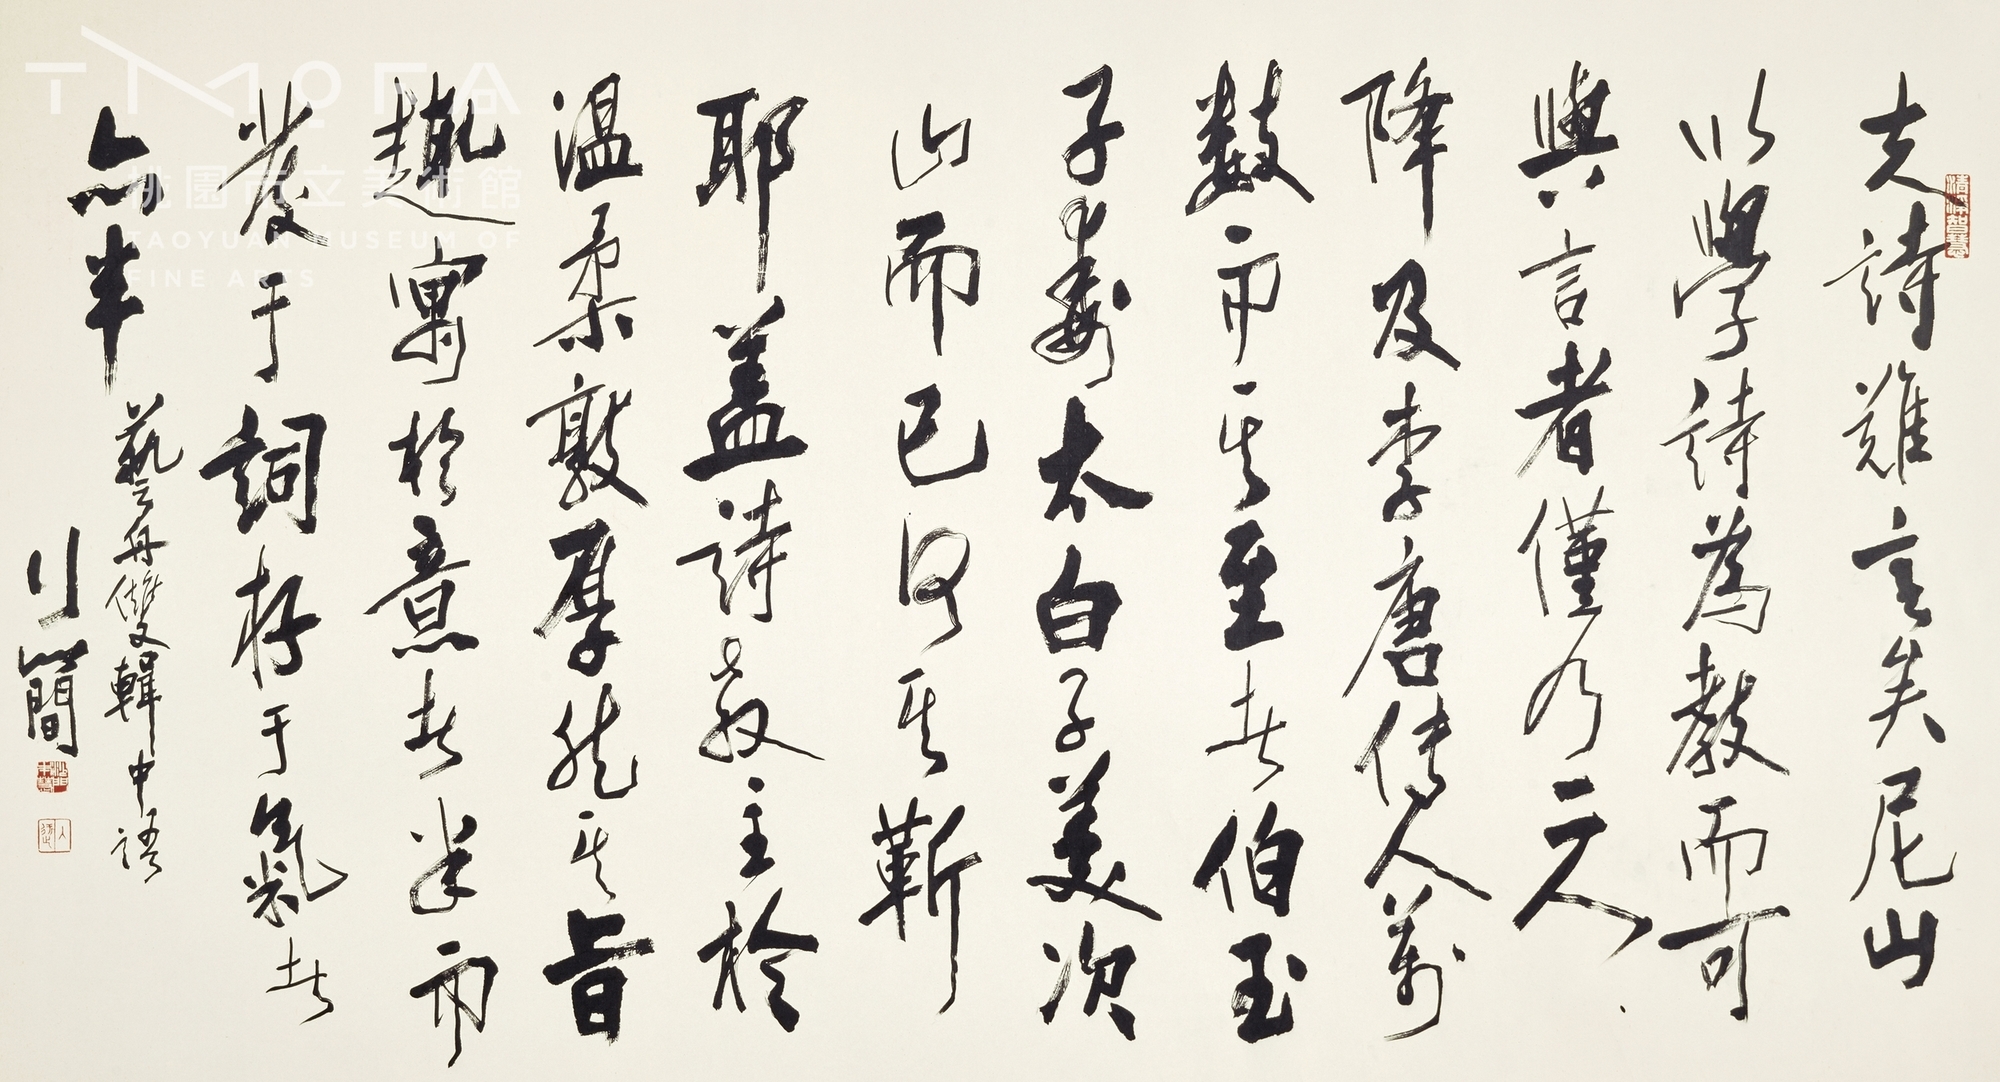 Sentences Selected from the Book "The Boat of Art with Two Paddles (Yi-Zhou-Shuang-Ji)"